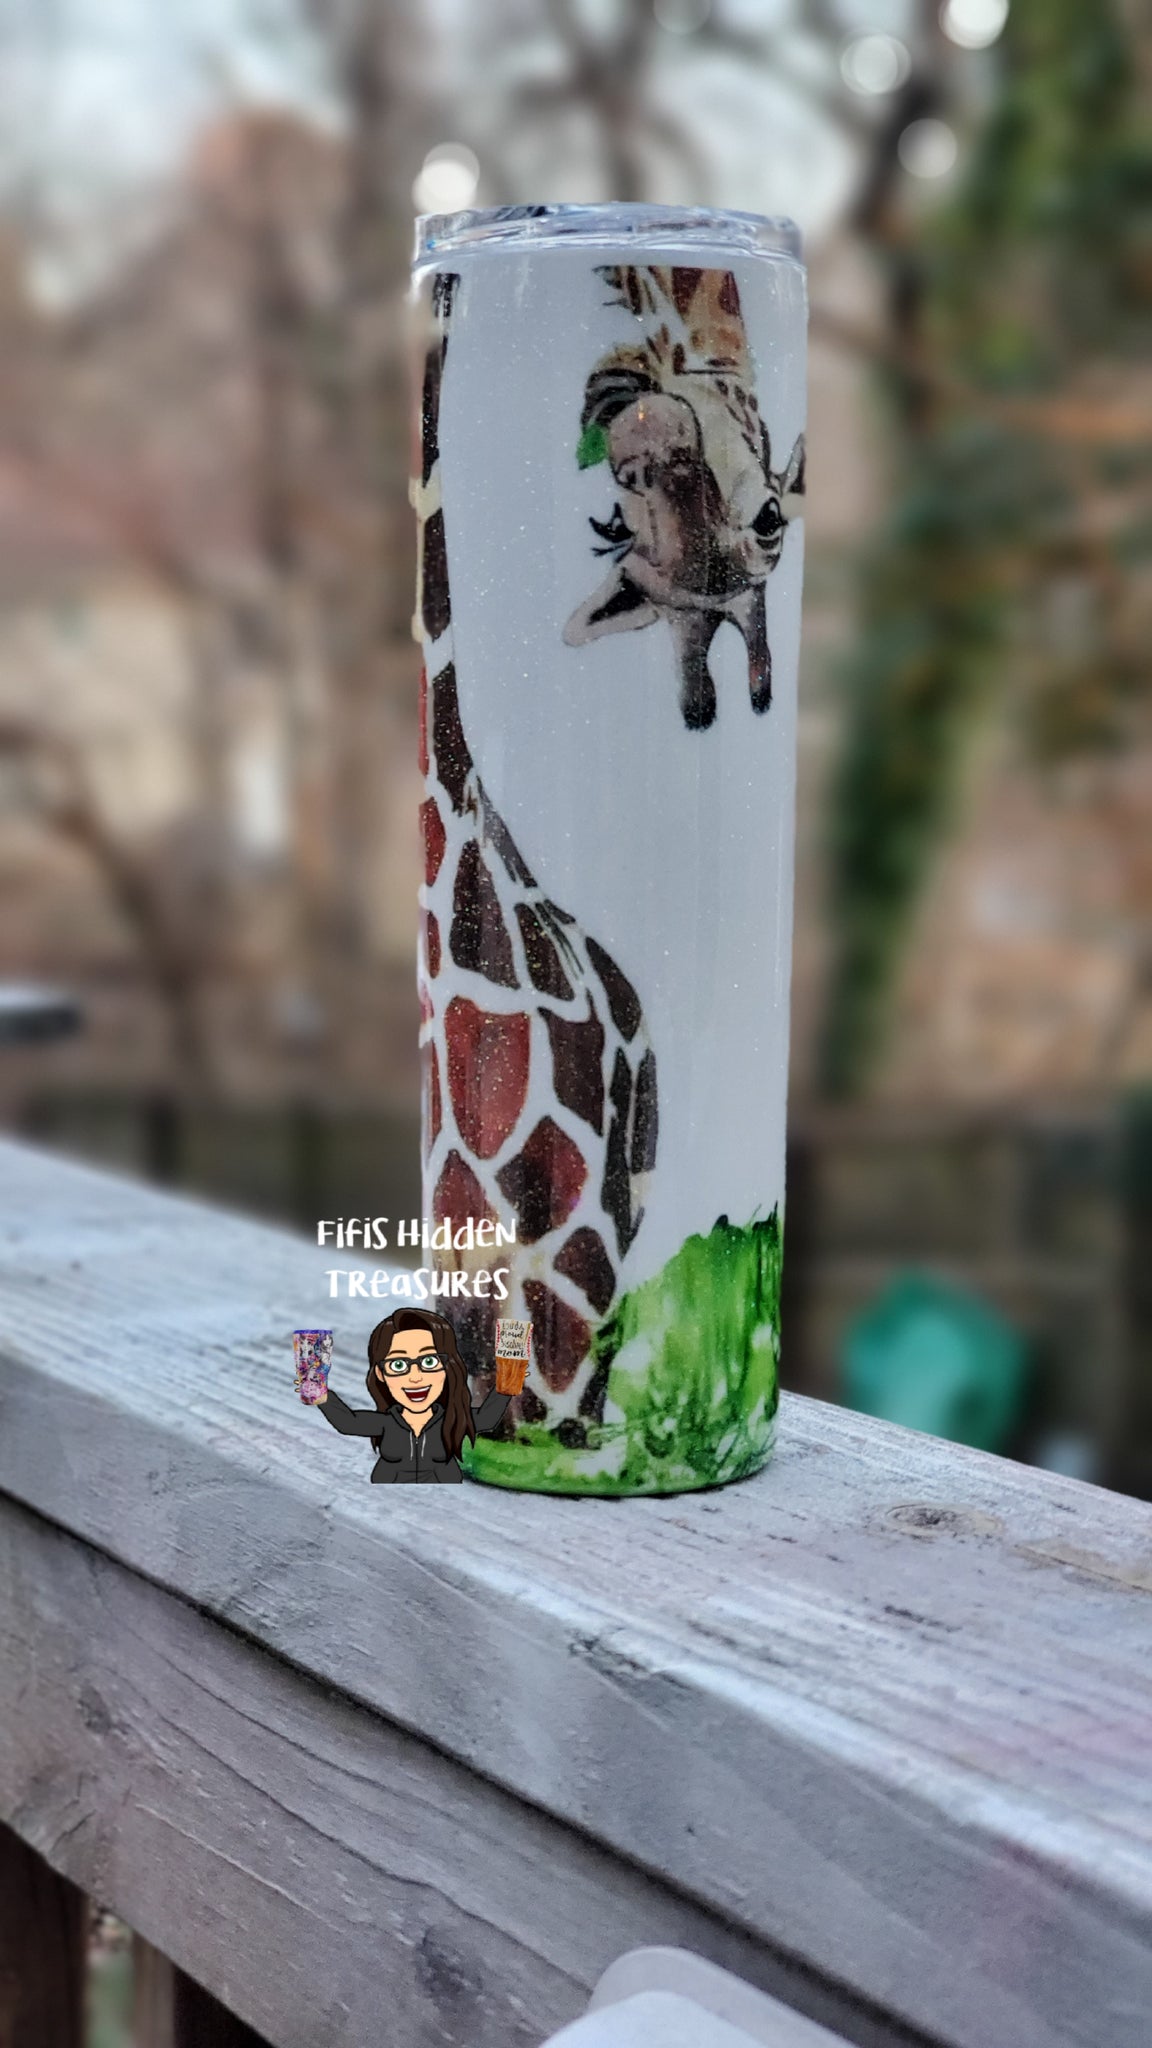 Just a Girl Who Loves Giraffe Tumbler Graphic by lloydcleora7924